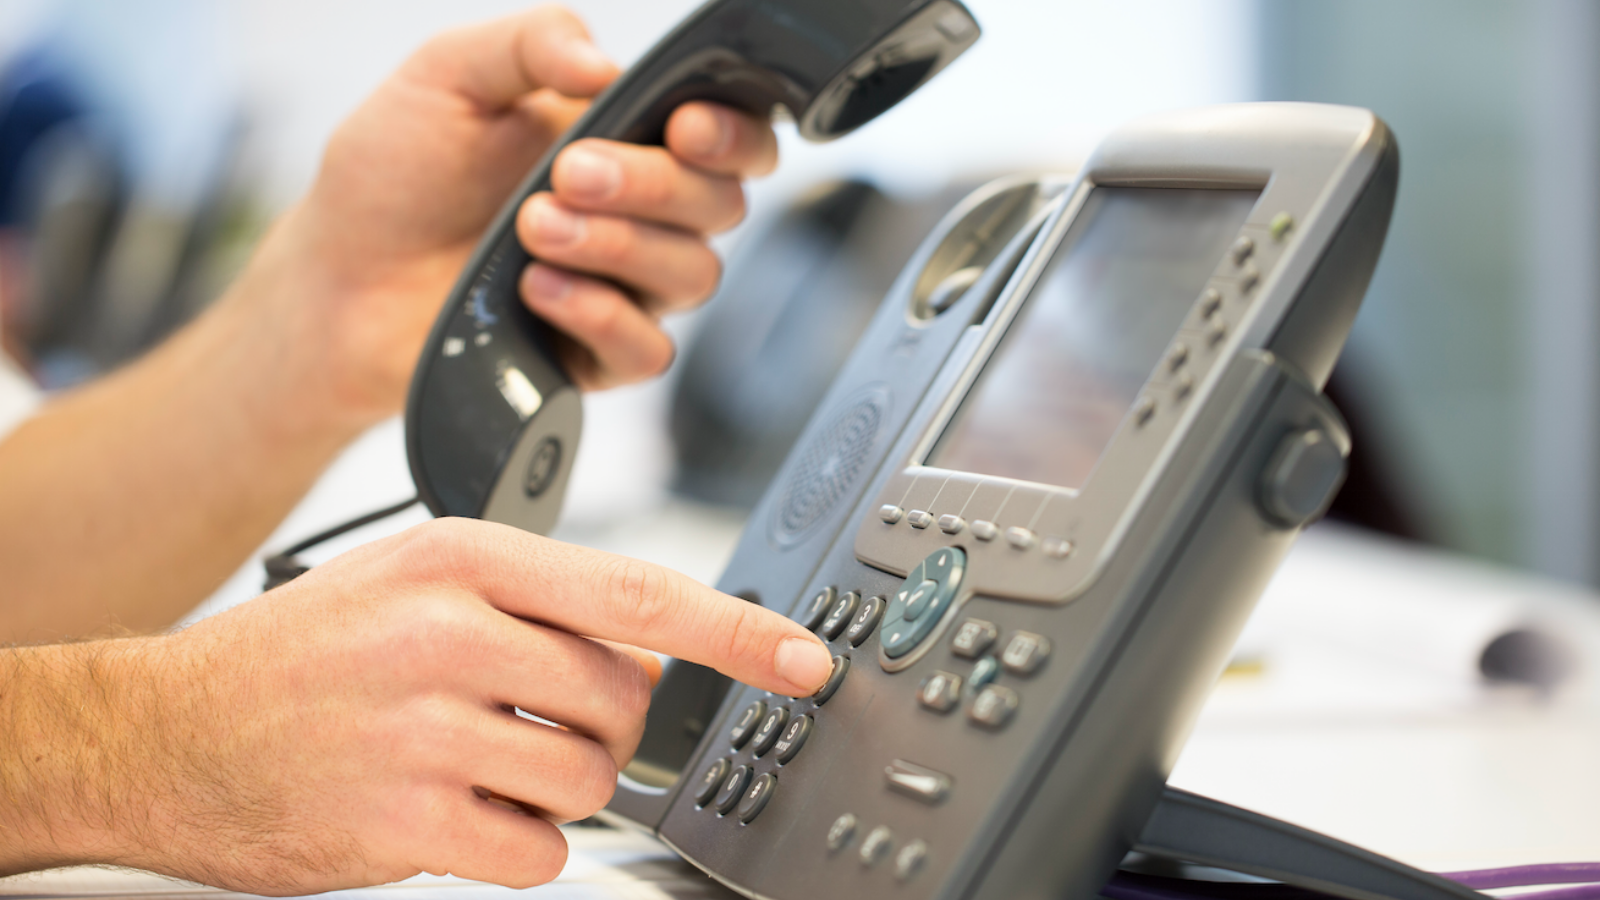 Hosted Voice vs. On-Premise Phone Systems: Which Is Better For Your Business?